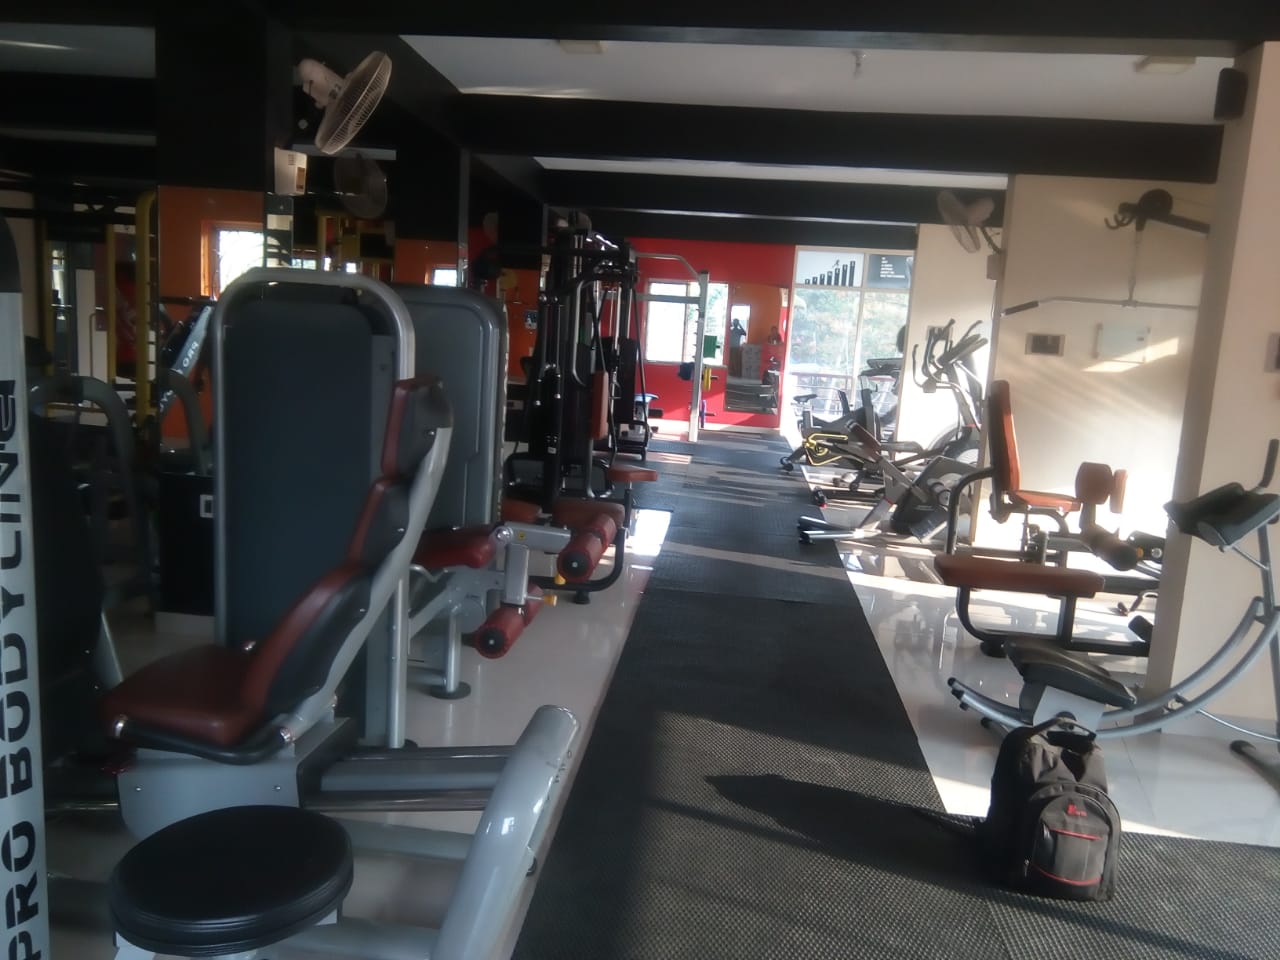 Fitness Equipment in Trivandrum, Home gym, Home gym equipment in Trivandrum, Gym equipment in Trivandrum, Treadmill